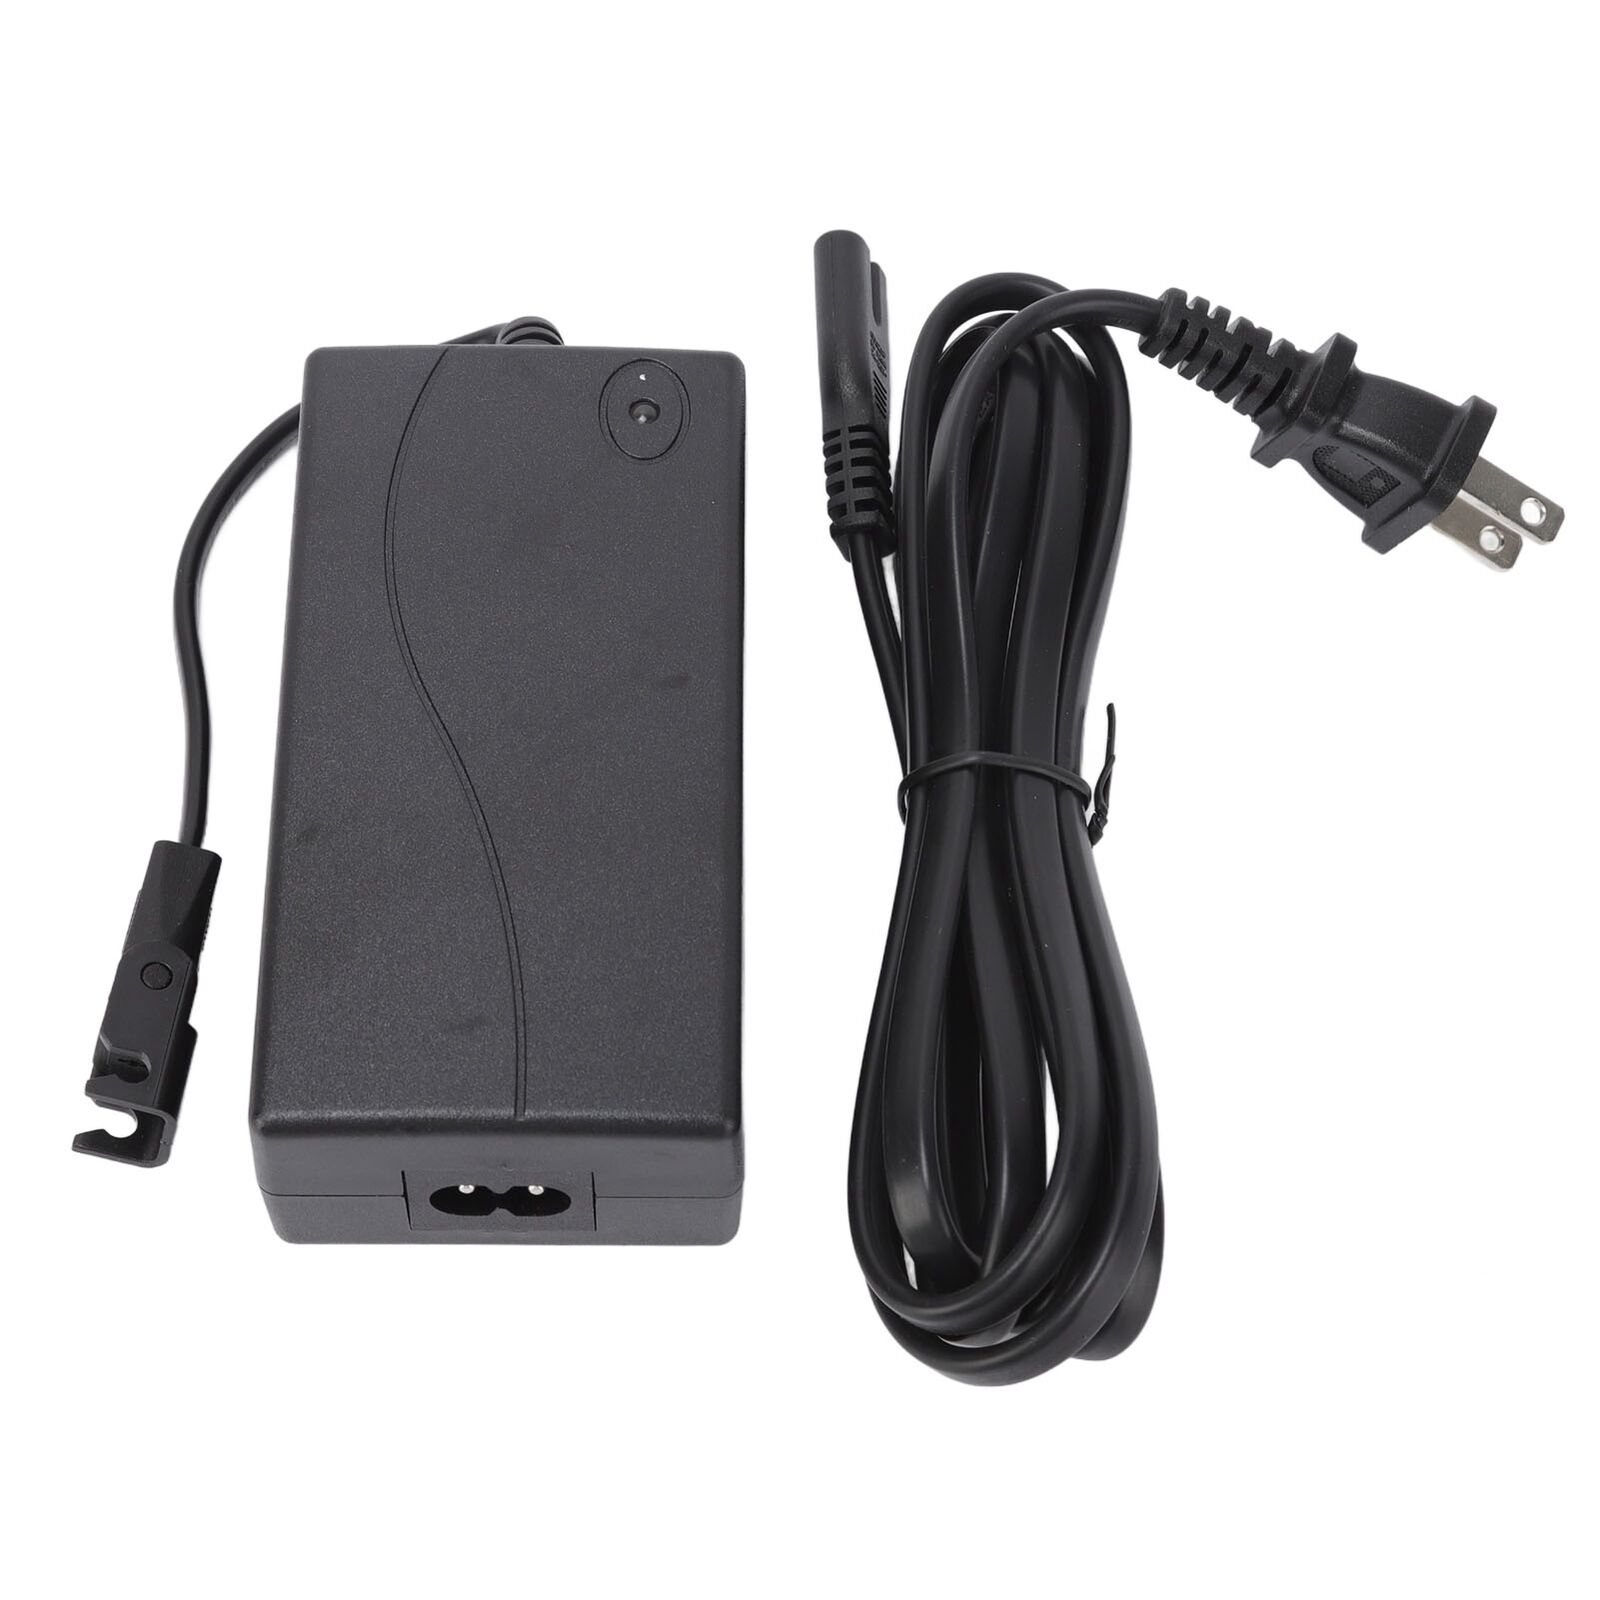 *Brand NEW*Recliner Power Supply Durable AC DC Adapter Waterproof Lift Chair Power Supply